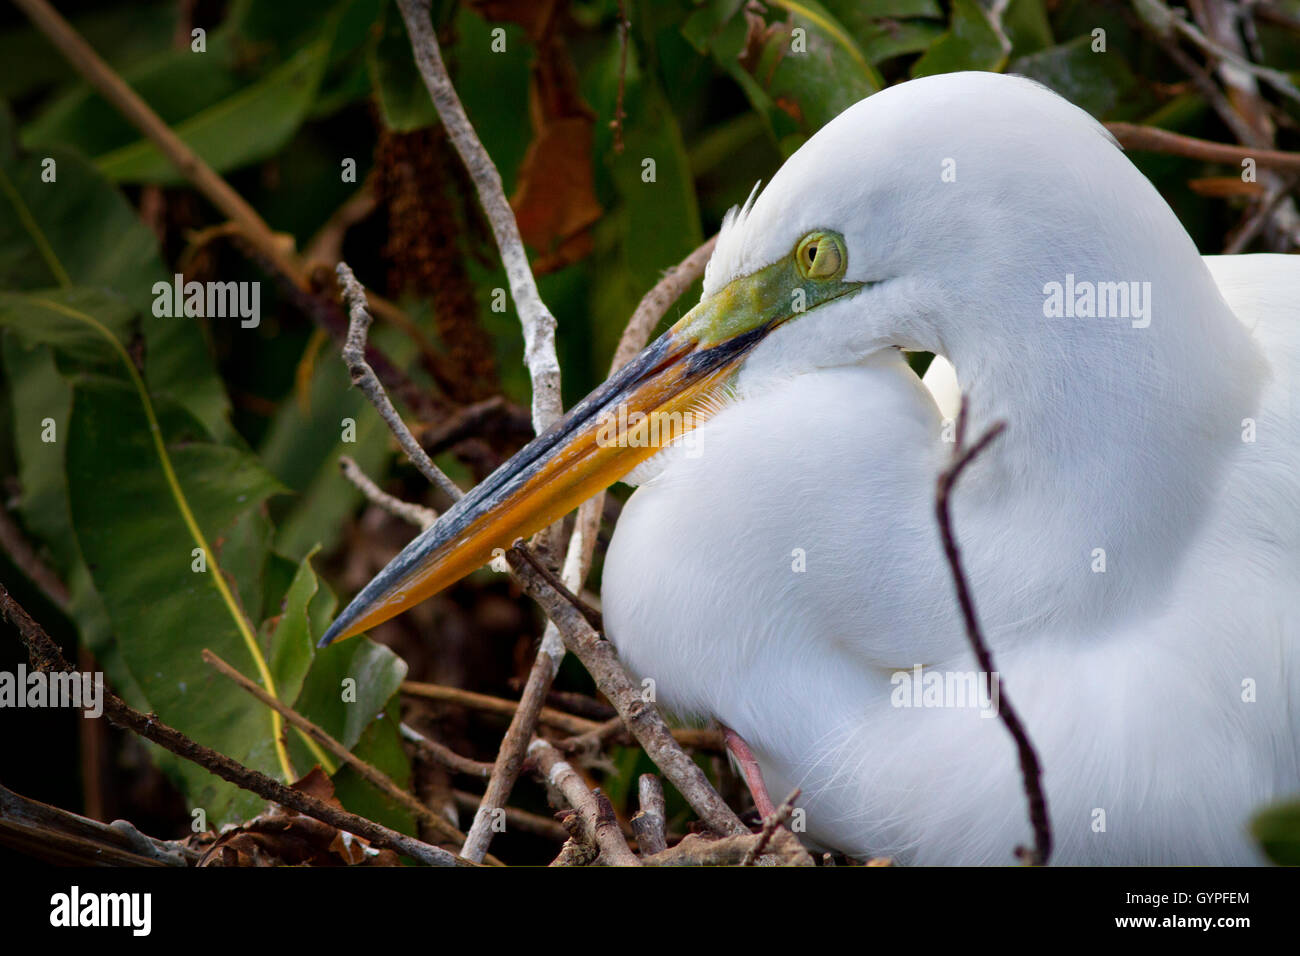 Detail of the eyelid closing, lower lid going up, on a sleepy White Egret sitting on its nest incubating eggs. Stock Photo